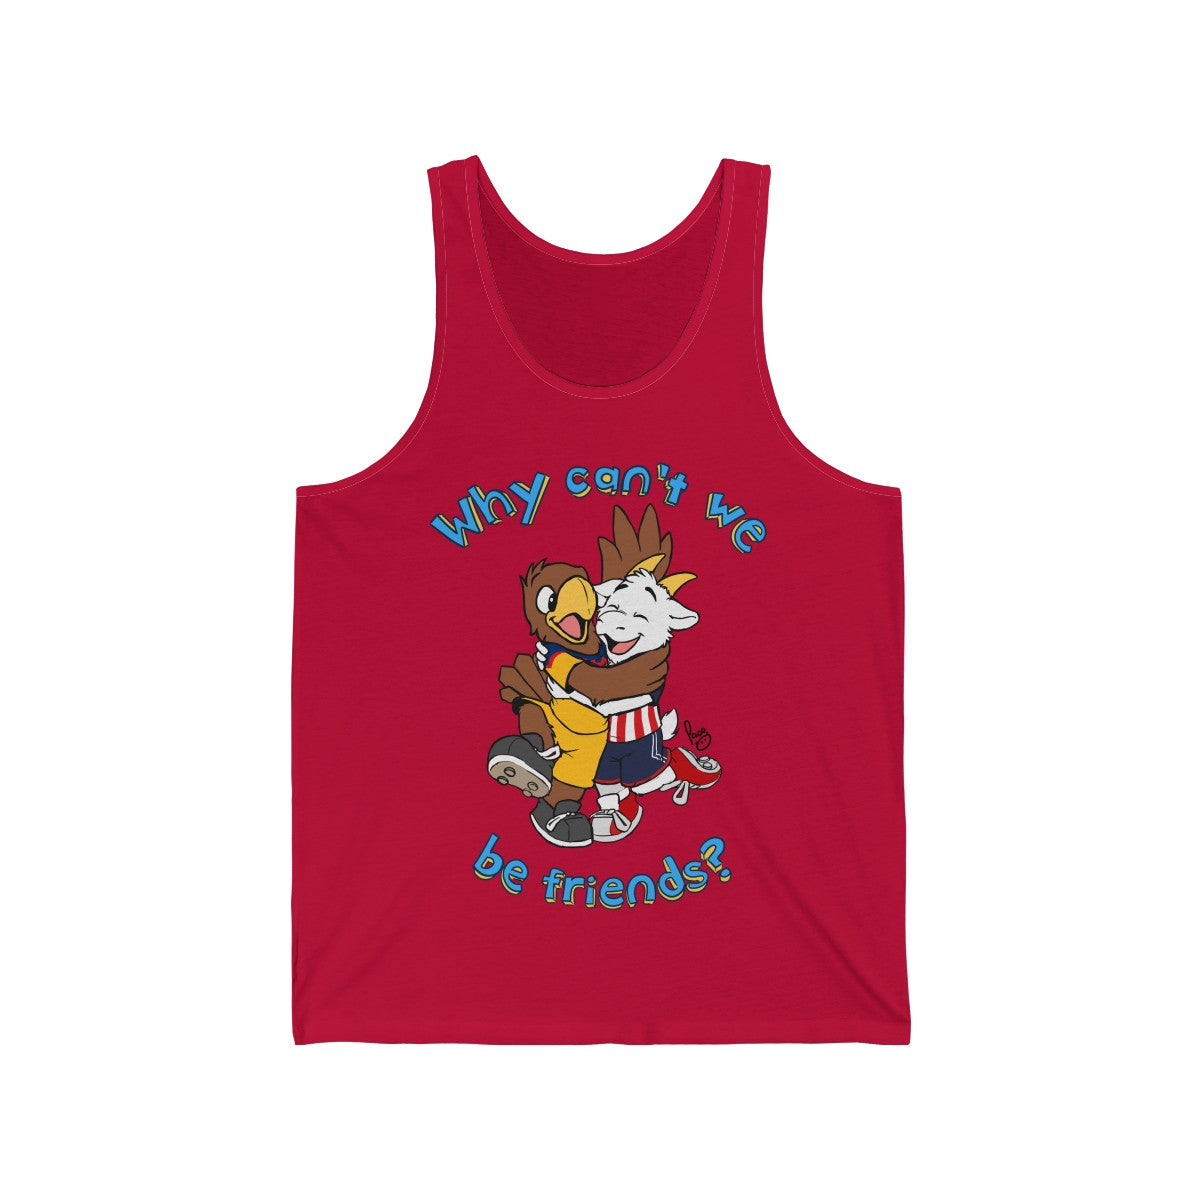 Why Can't we be Friends? - Tank Top Tank Top Paco Panda Red XS 